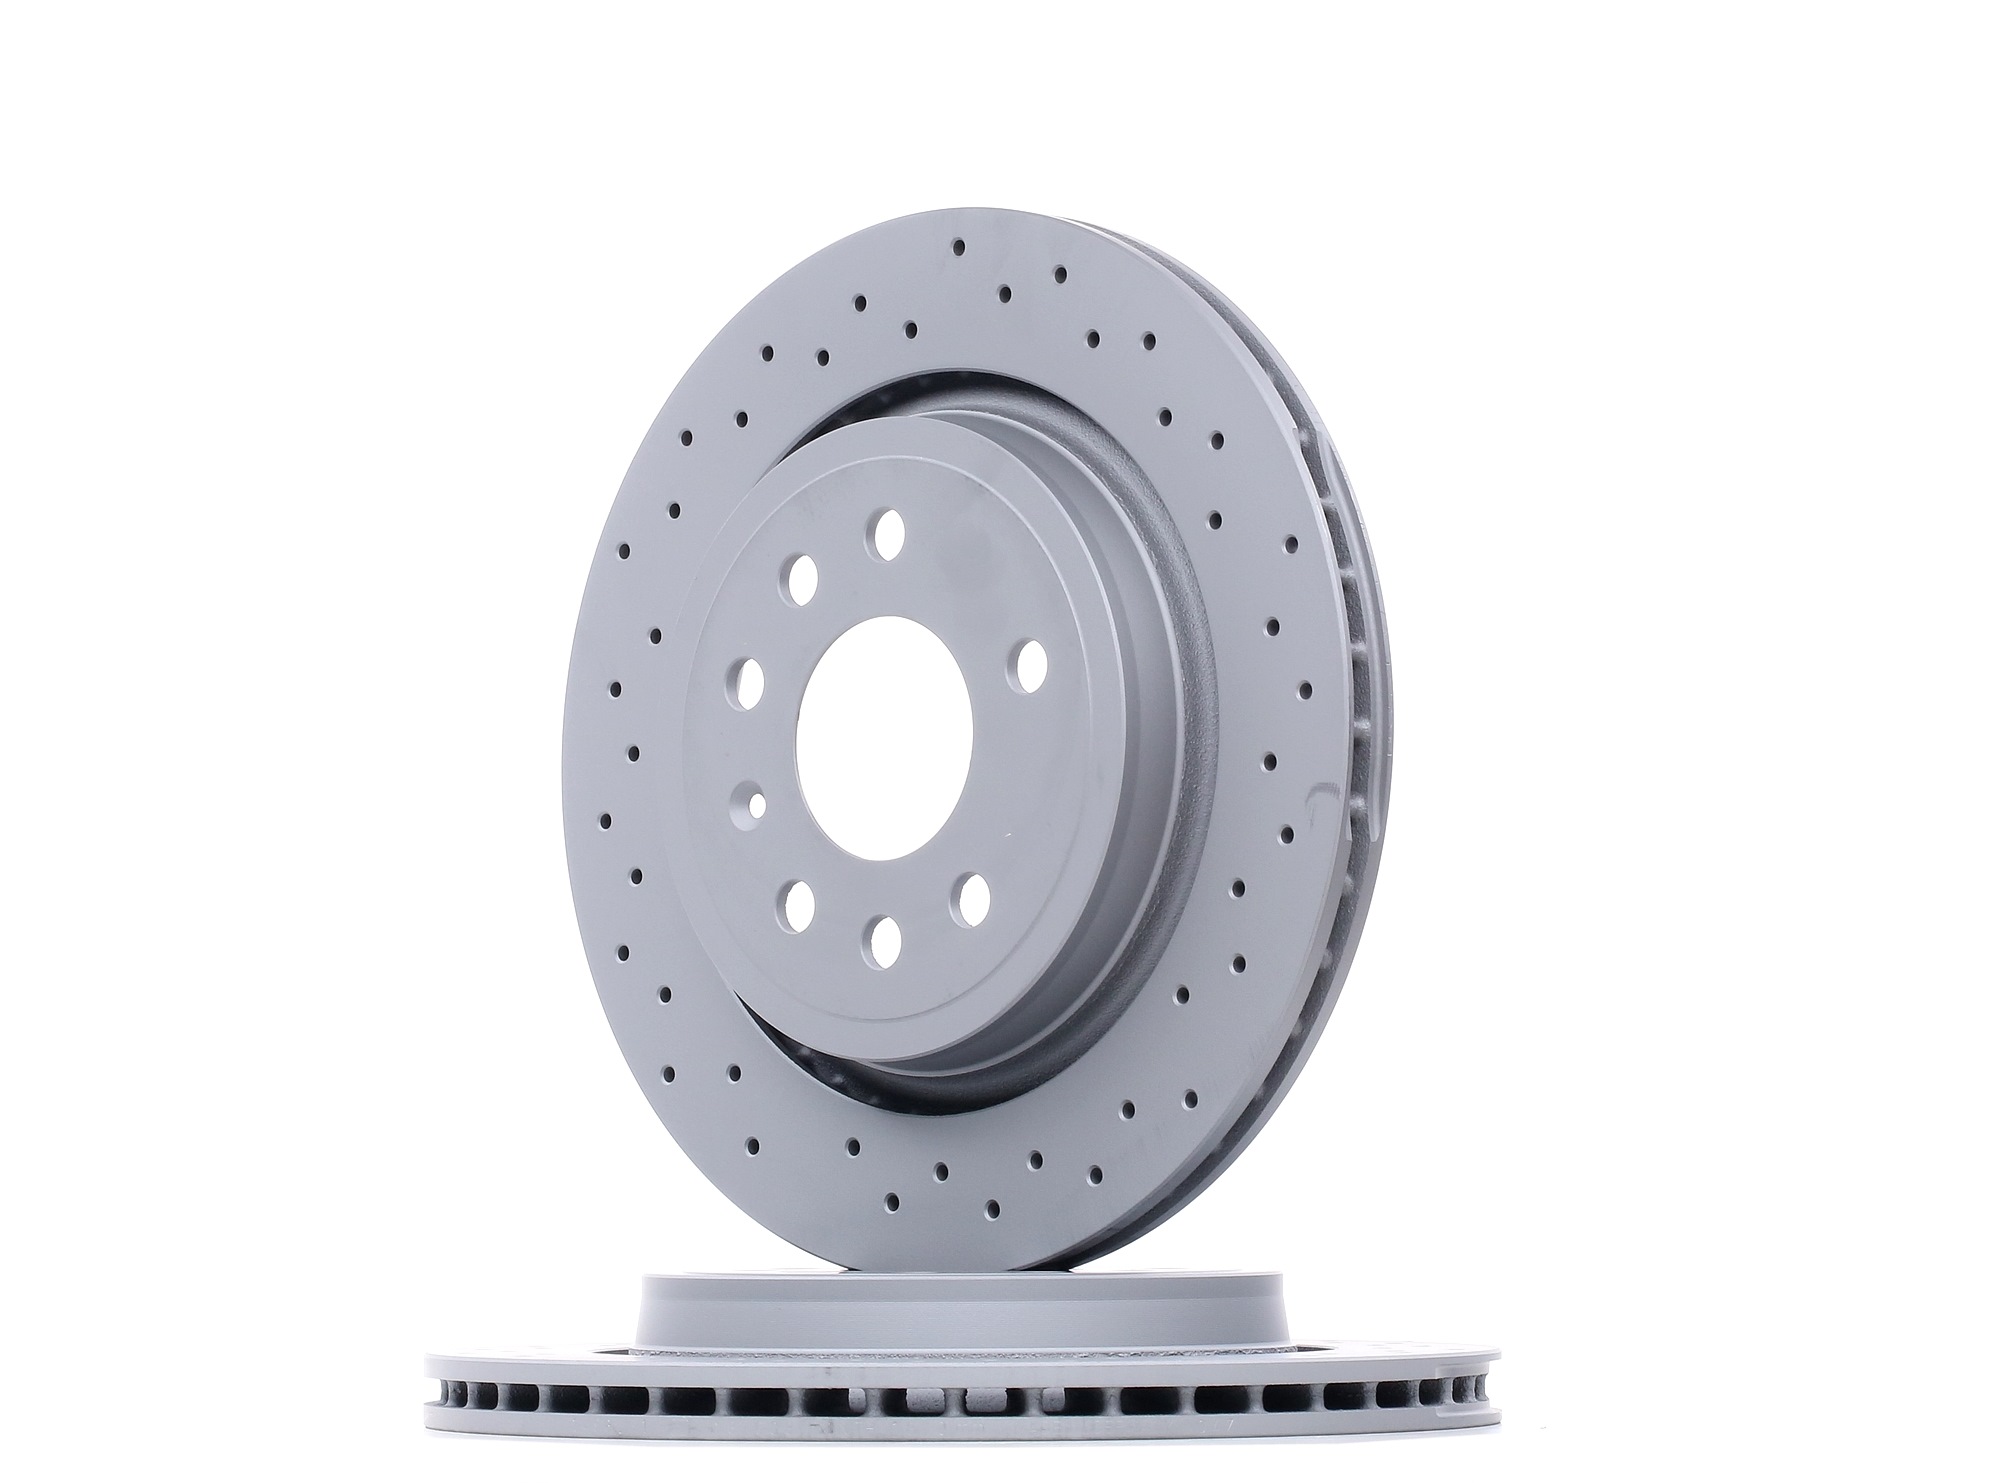 ZIMMERMANN SPORT COAT Z 430.1496.52 Brake disc 292x20mm, 8/5, 5x110, Externally Vented, Perforated, Coated